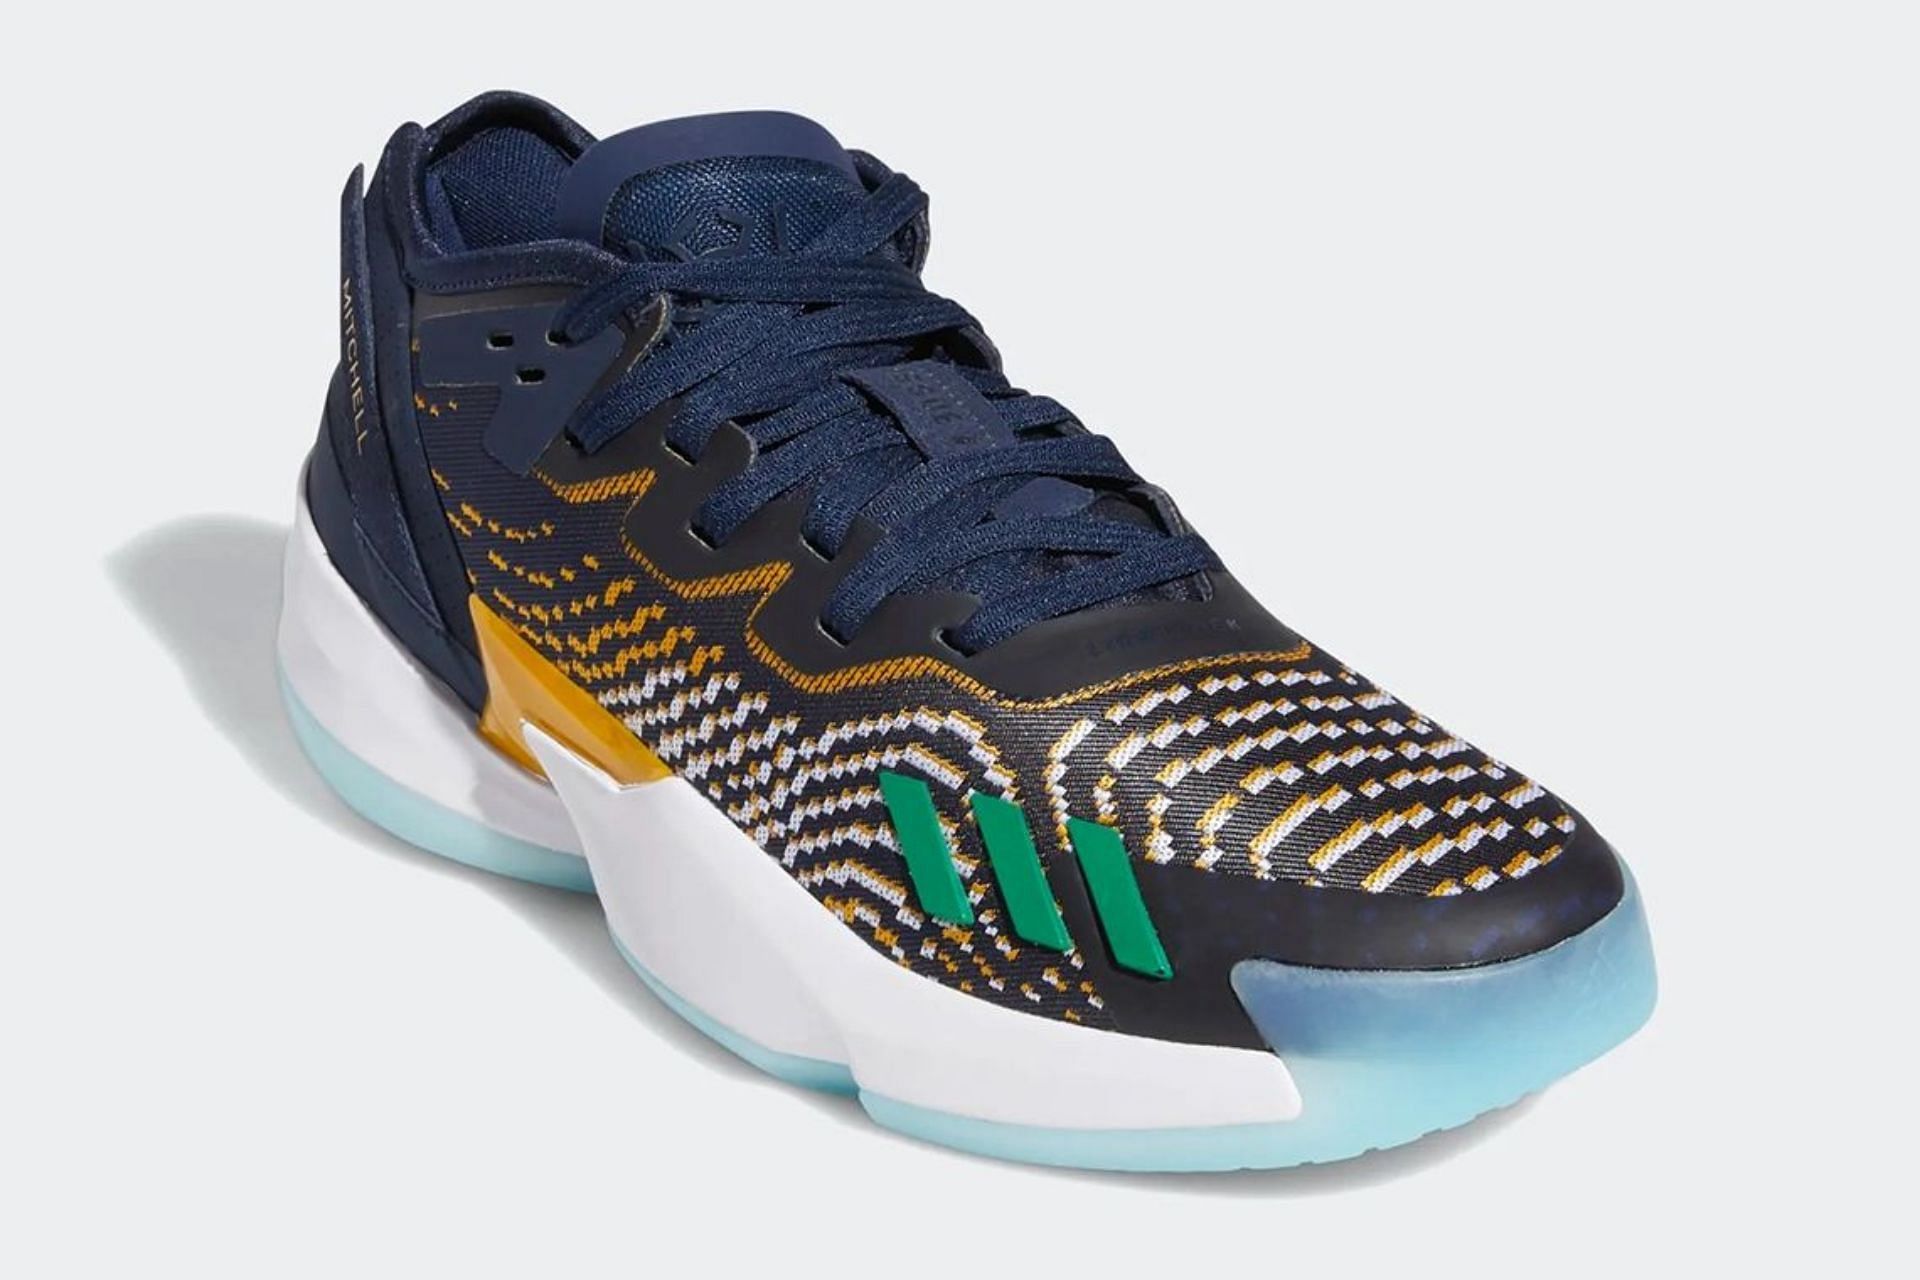 Where to buy Adidas D.O.N. Issue #4 Jazz” shoes? Price and more details explored